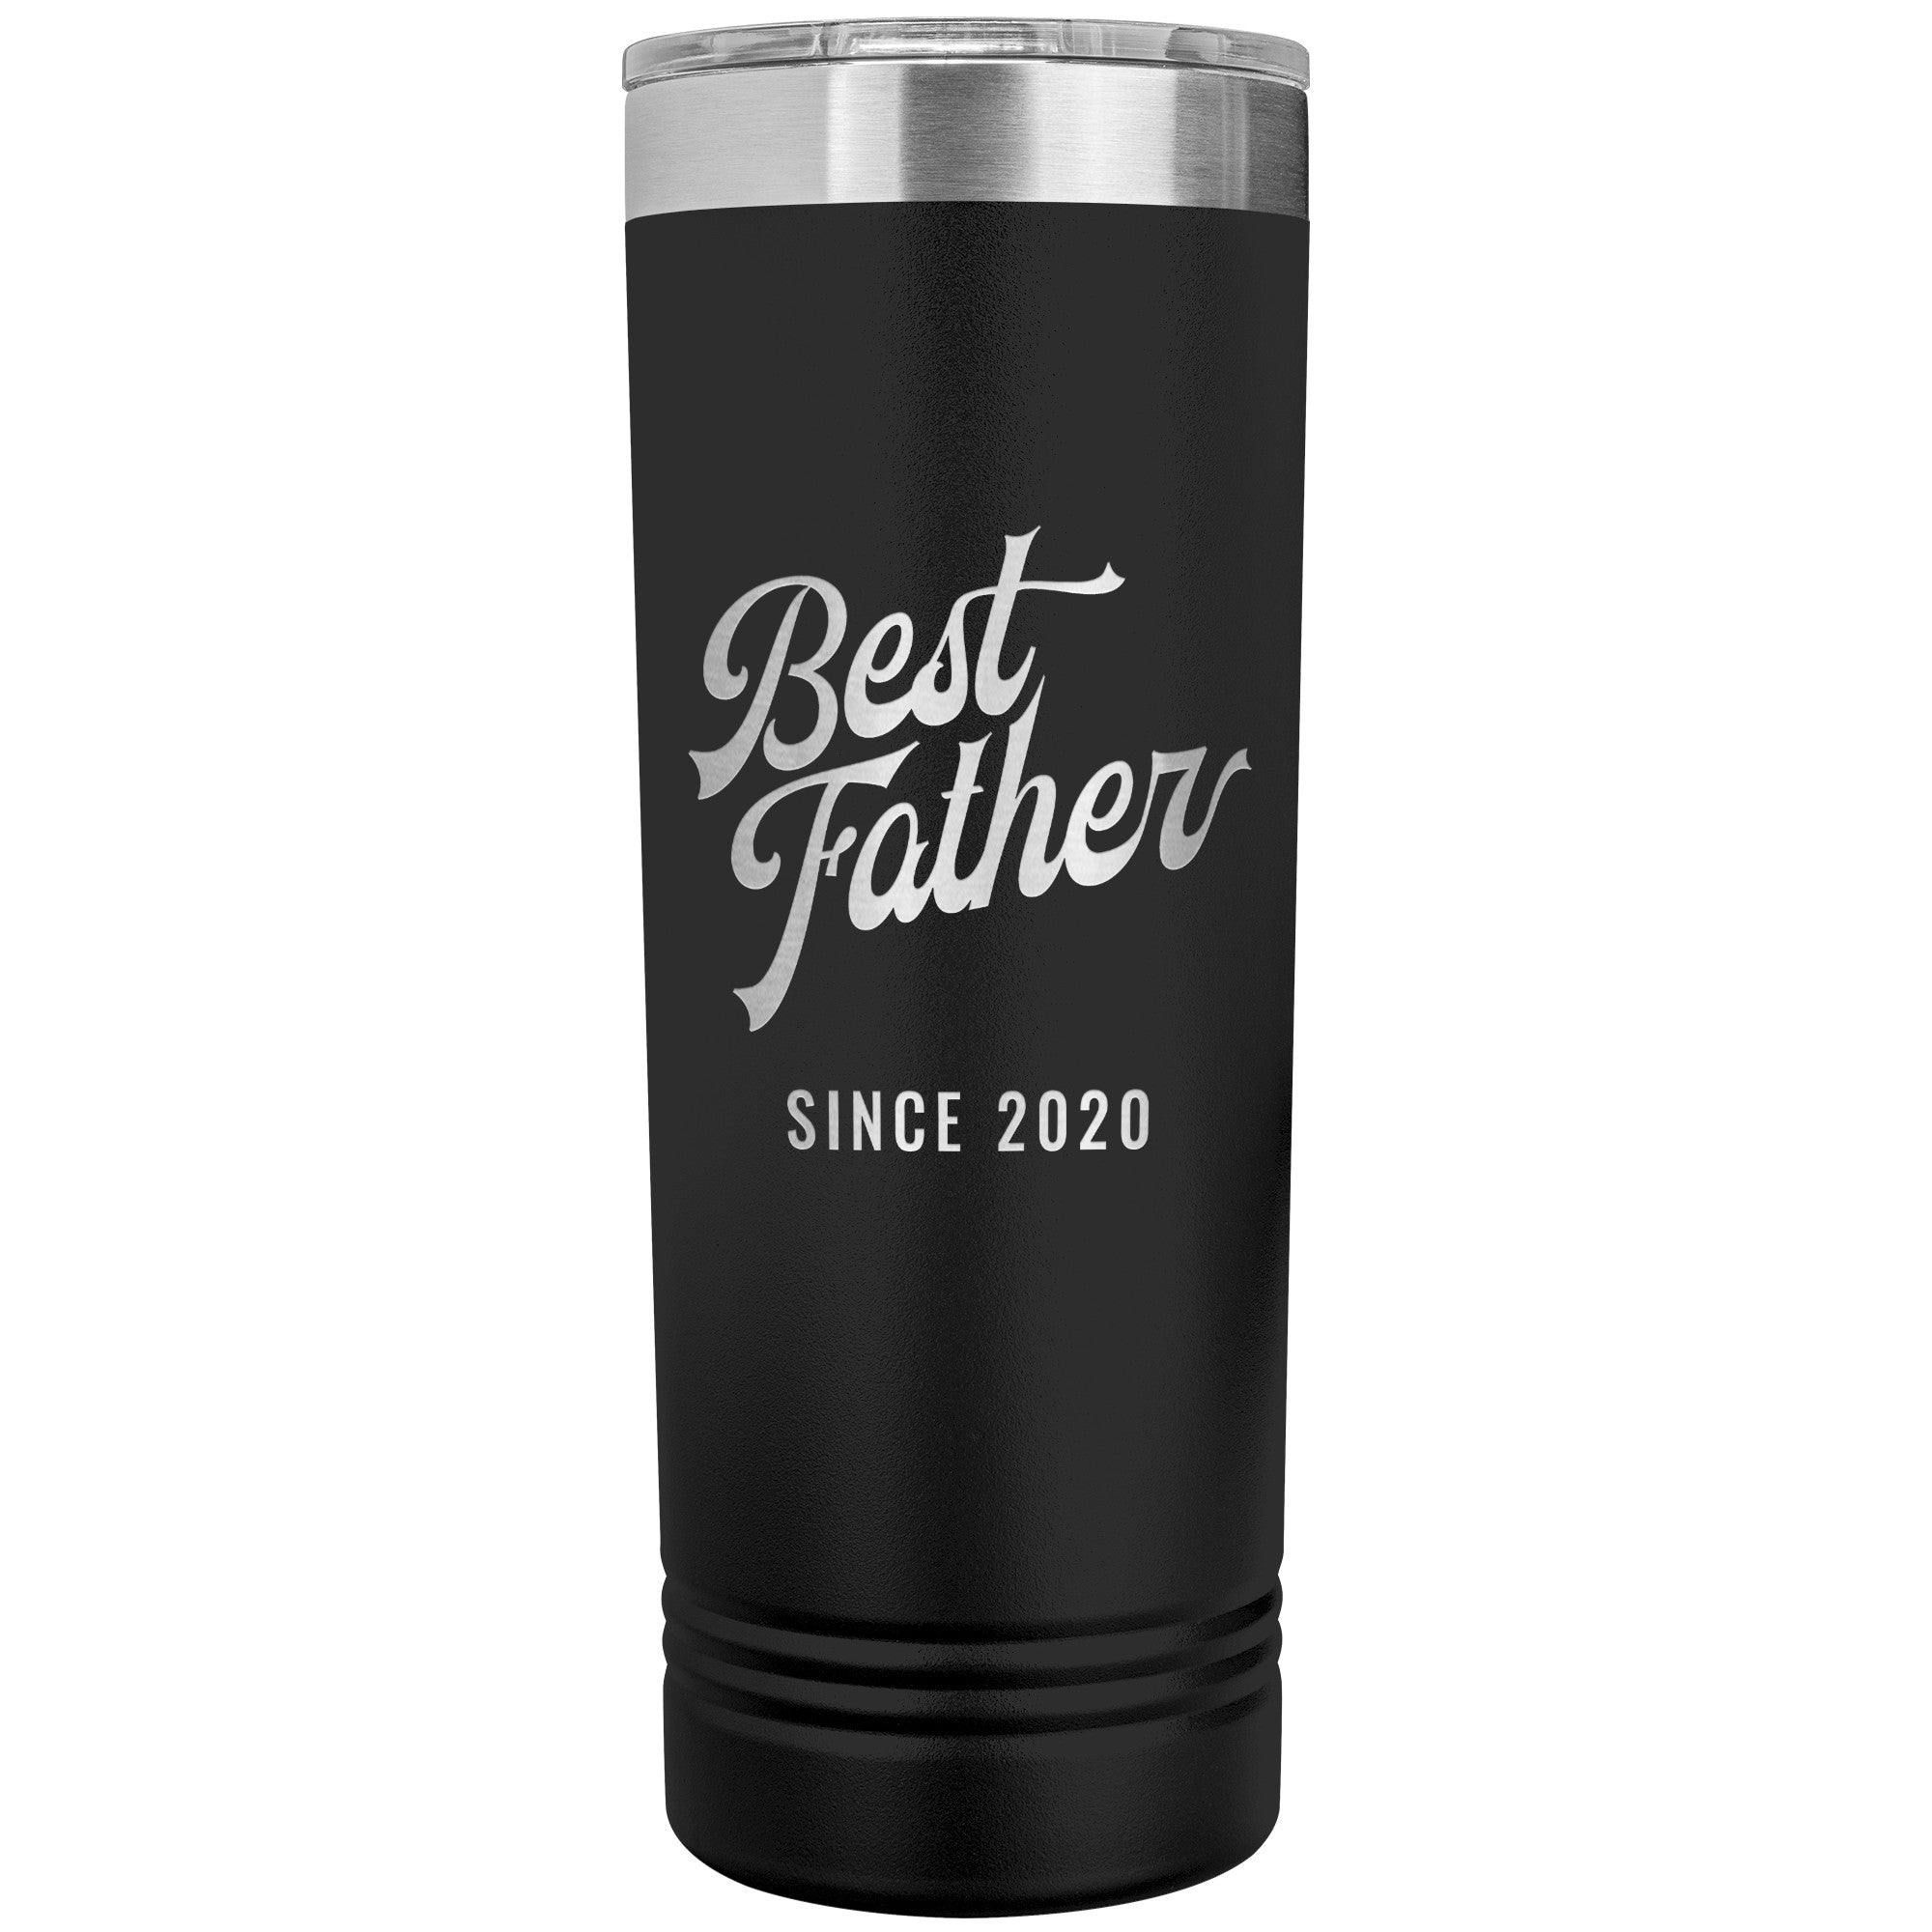 Best Father Since 2020 - 22oz Insulated Skinny Tumbler